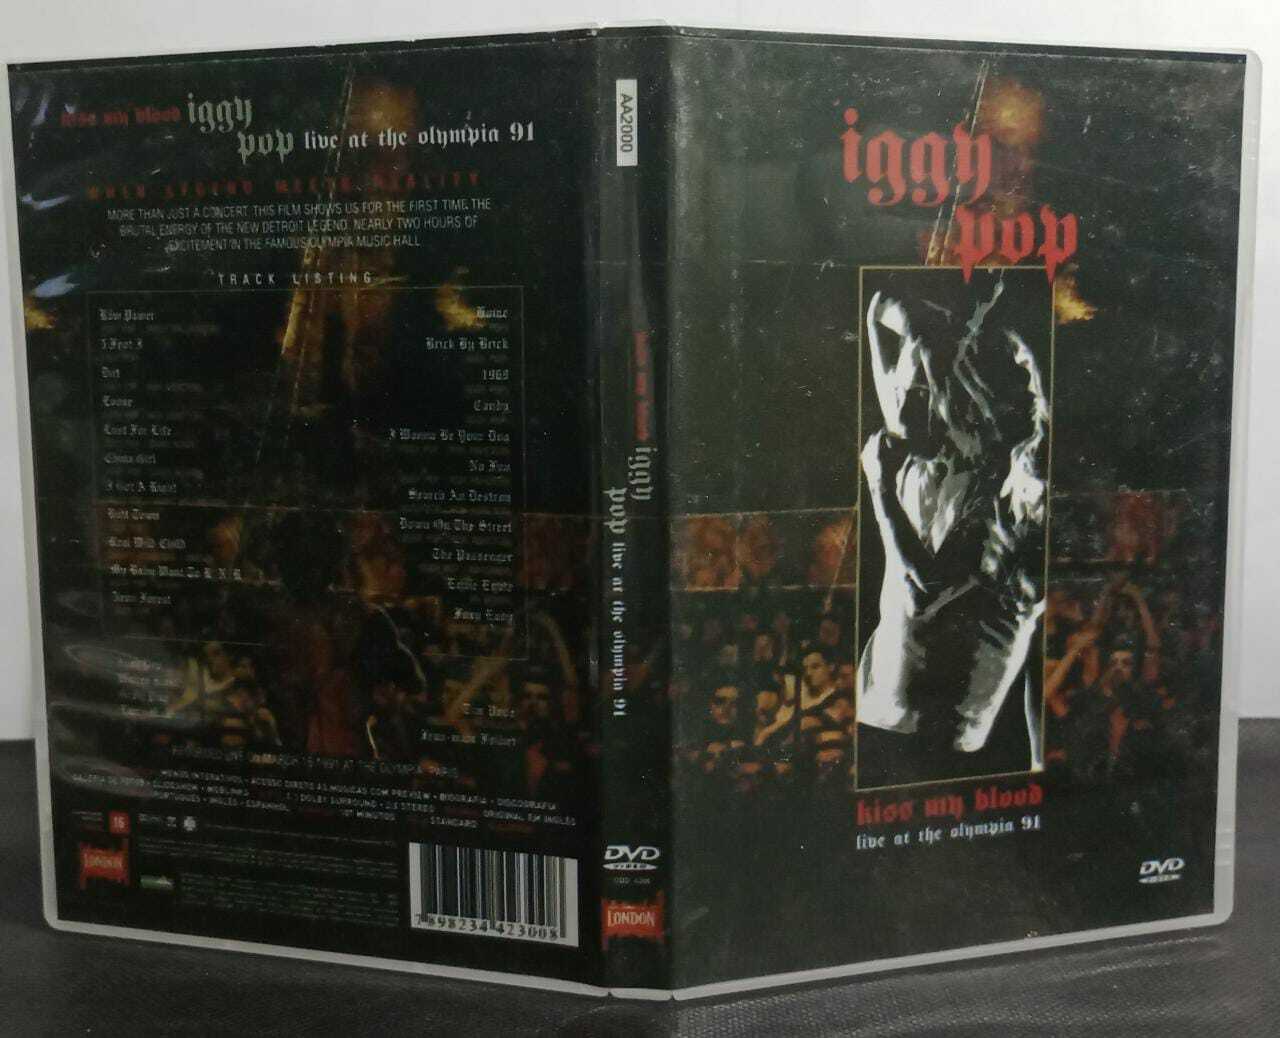 DVD - Iggy Pop - Kiss My Blood Live At The Olympia 1991